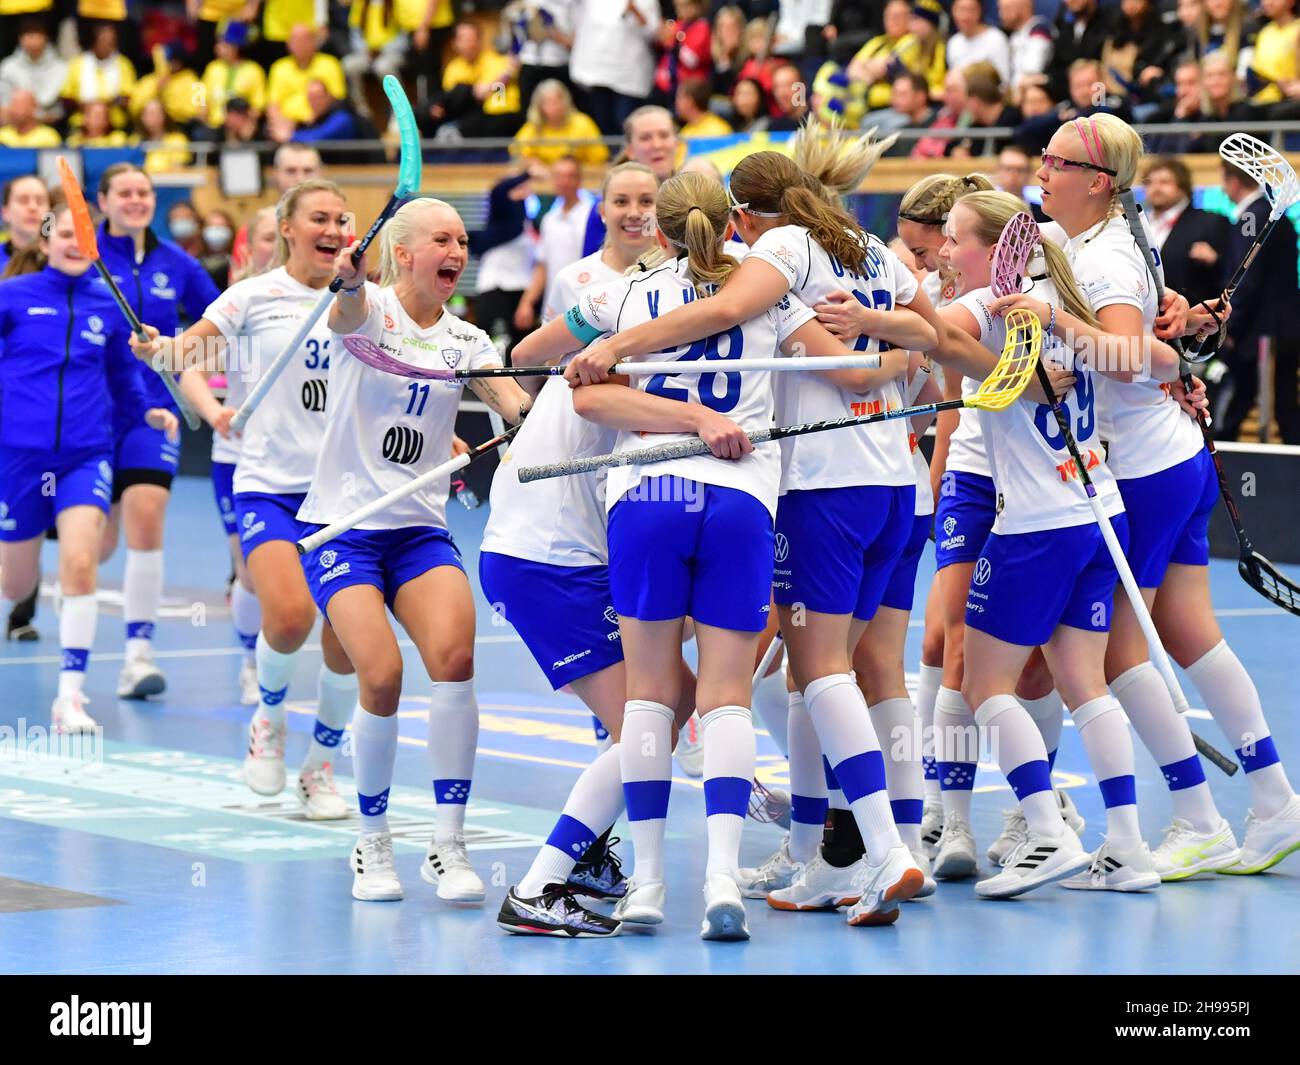 Finland's team celebrates a goal (33) during the final between Finland